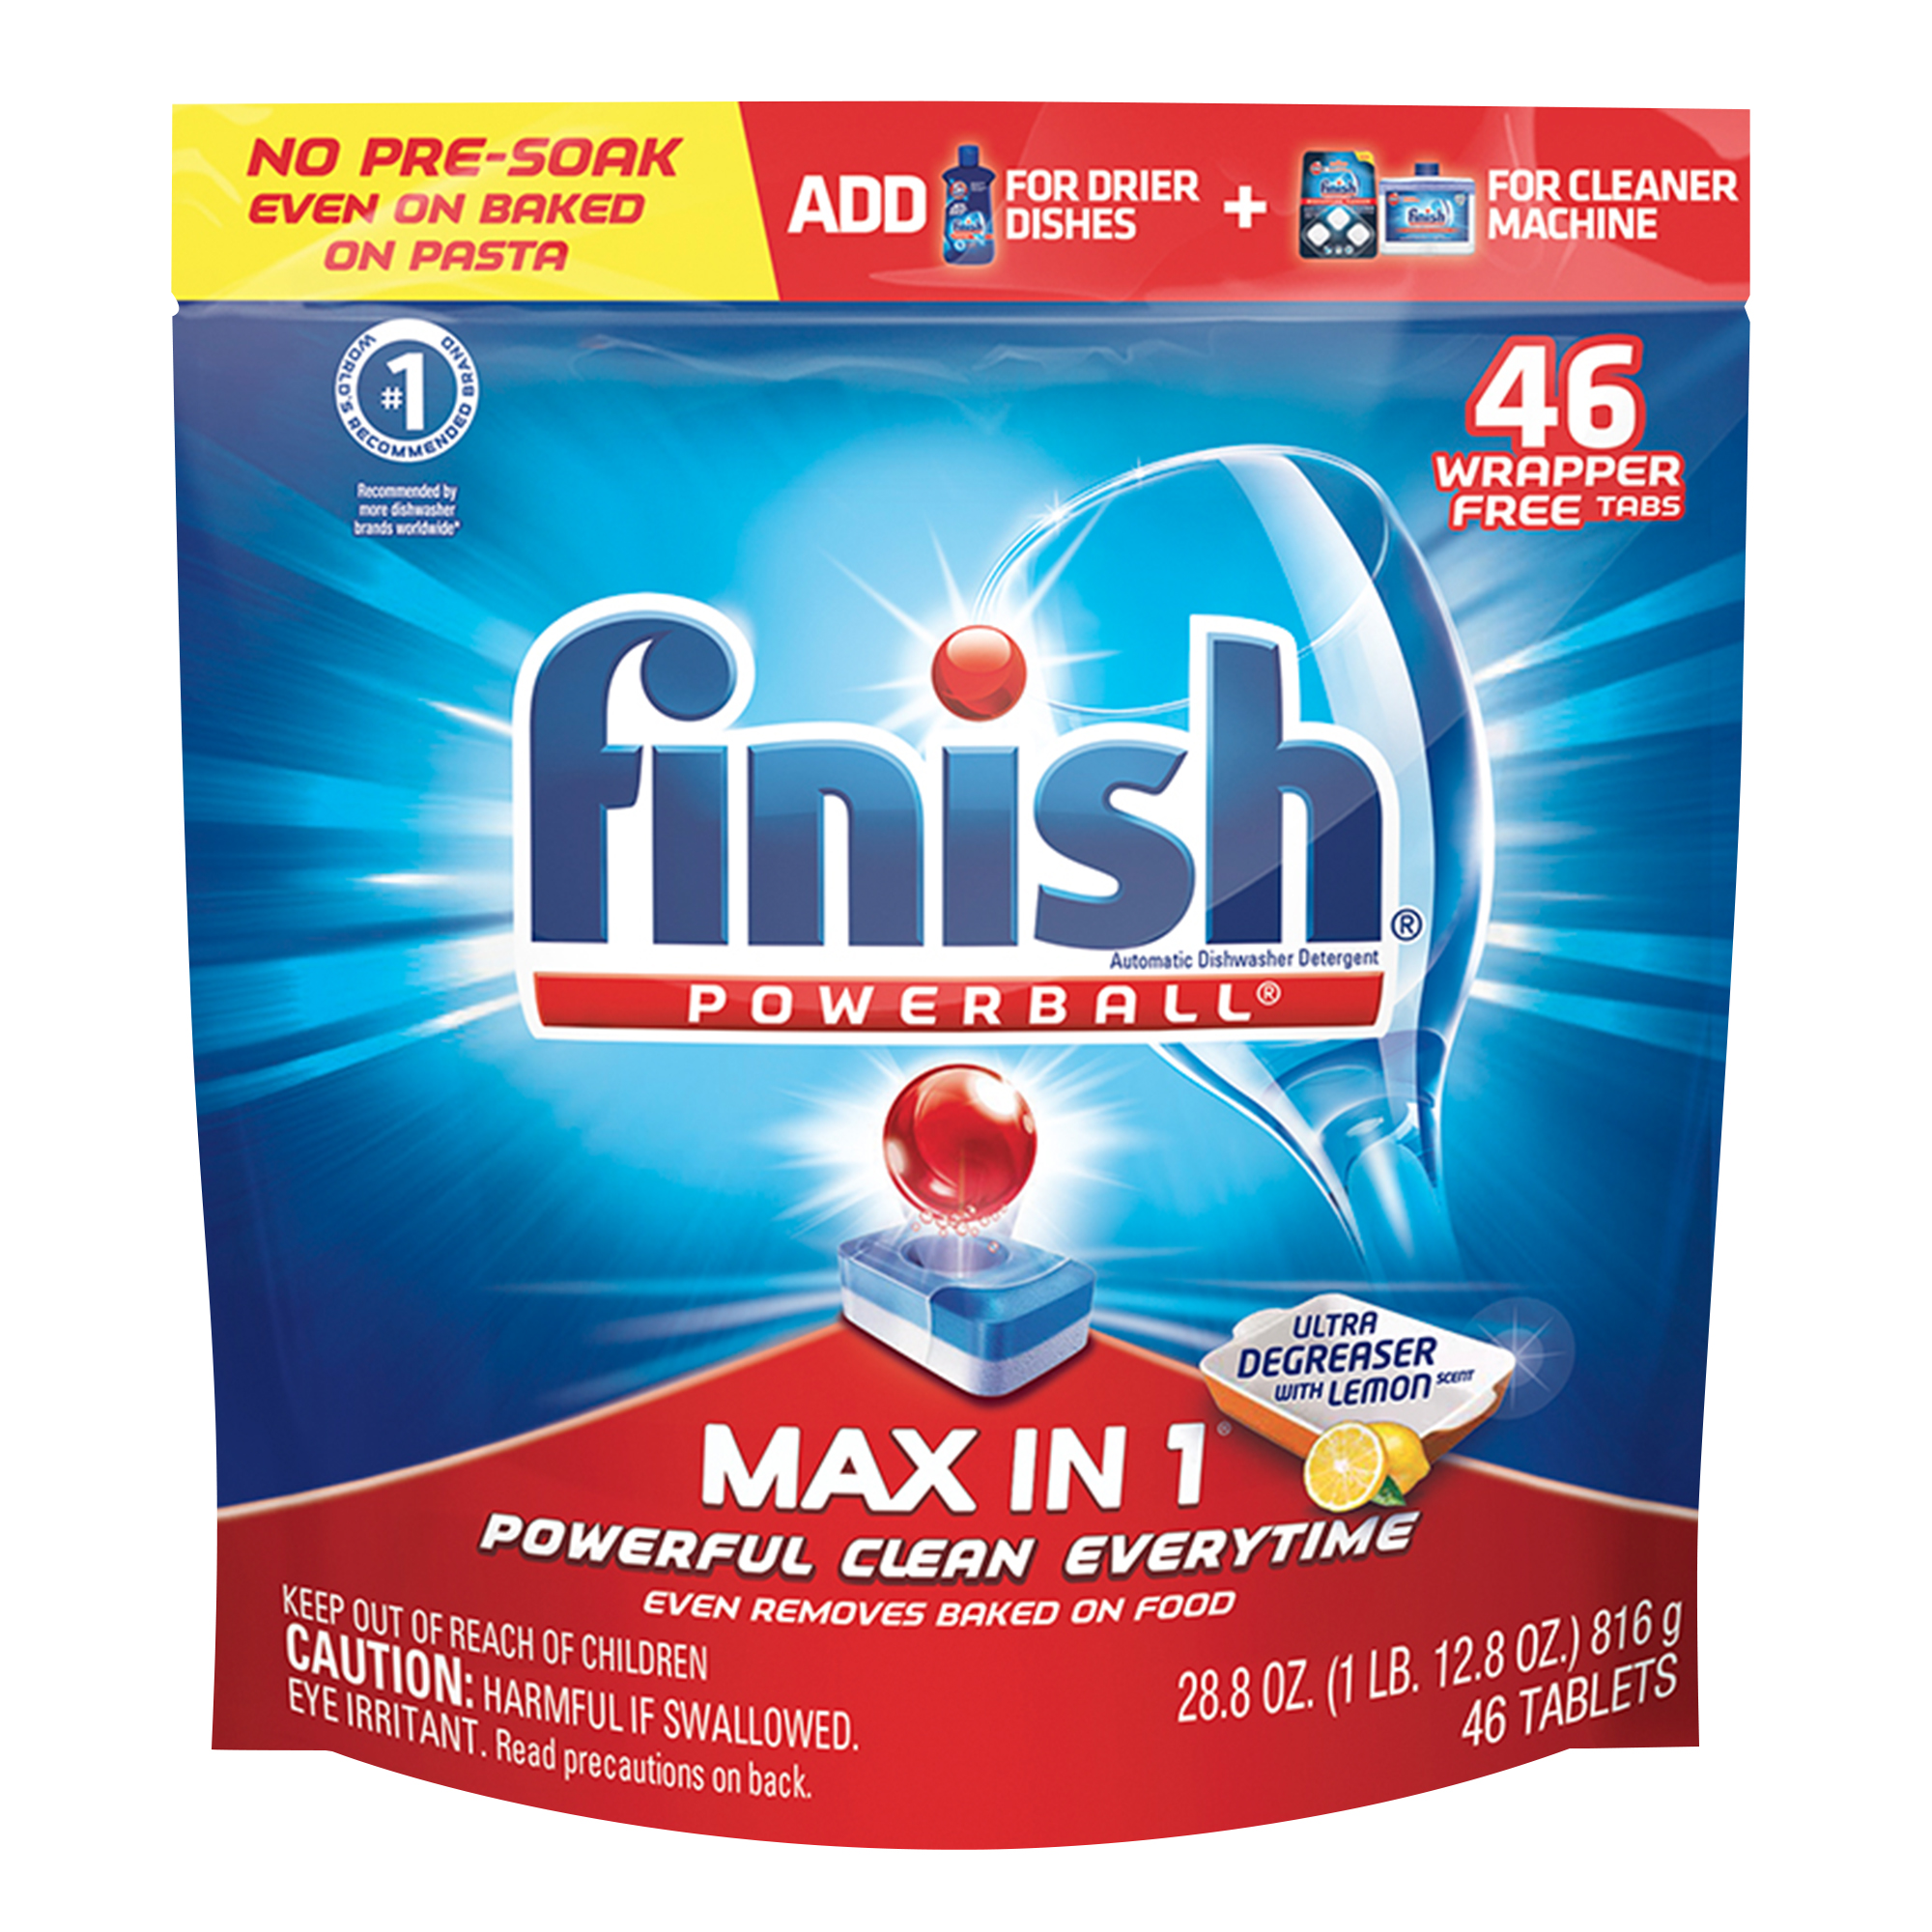 FINISH Powerball Max In 1 UltraDegreaser with Lemon